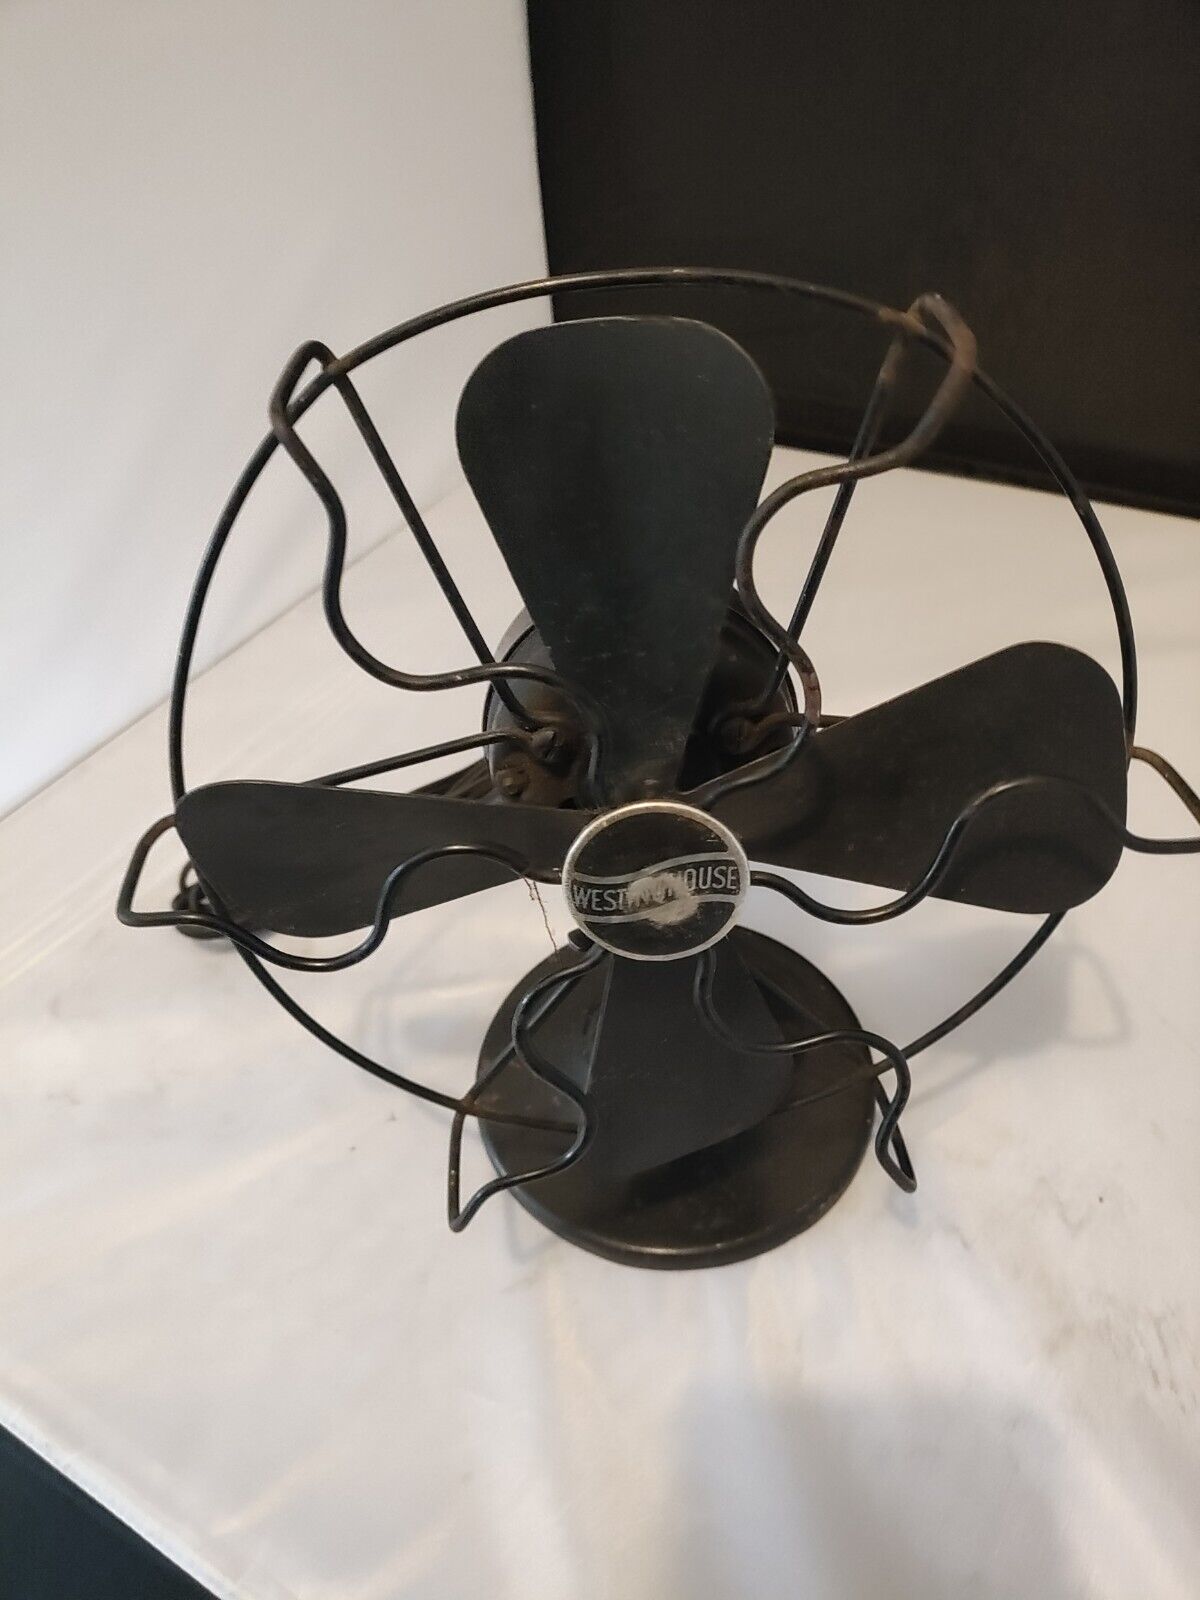 1900's WESTINGHOUSE ELECTRIC WHIRLWIND 100-125 VOLT STYLE 269172 DESK FAN WORKS